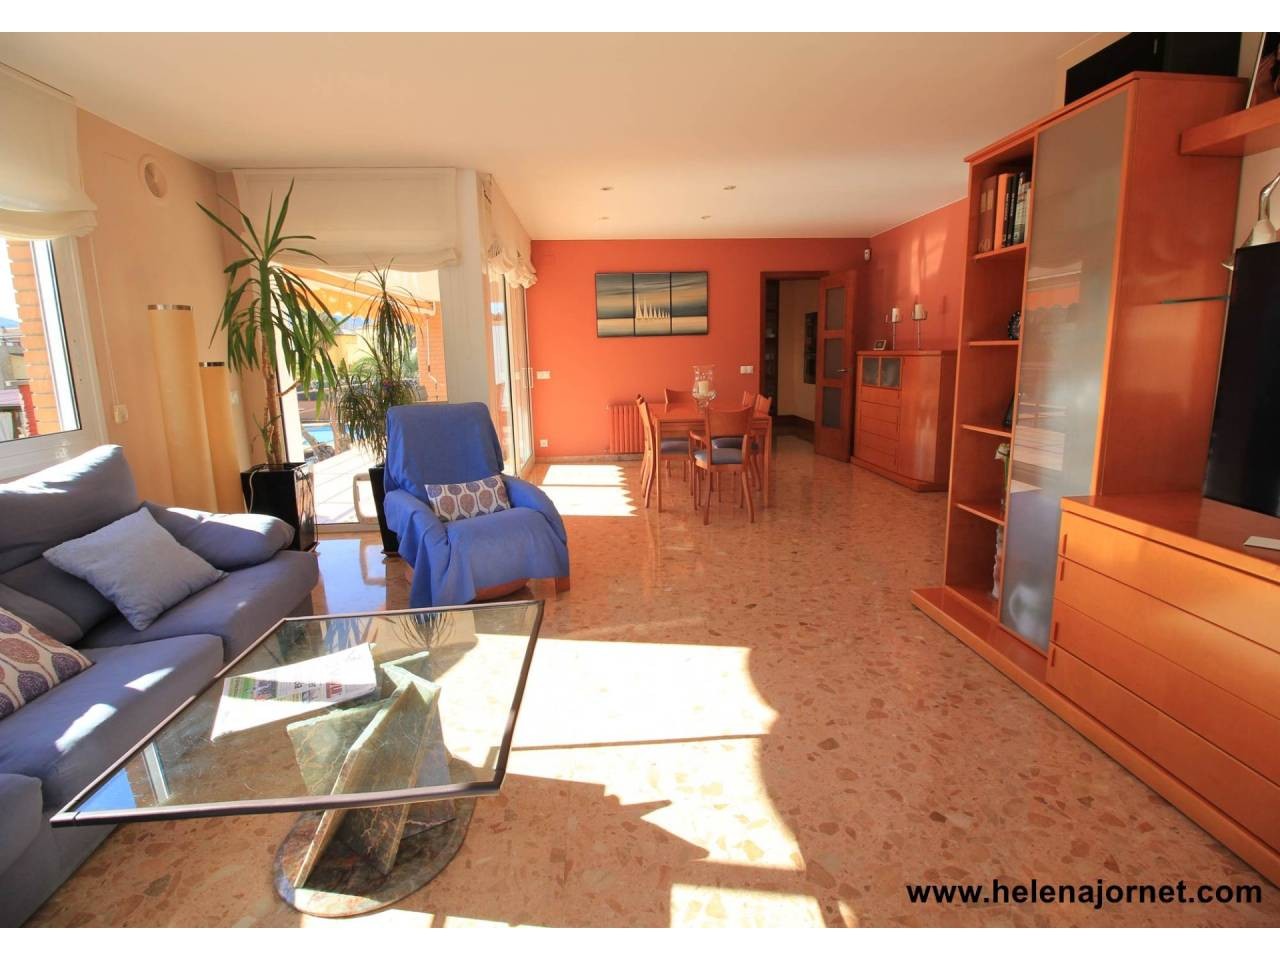 House for sale in Castell d'Aro - 574